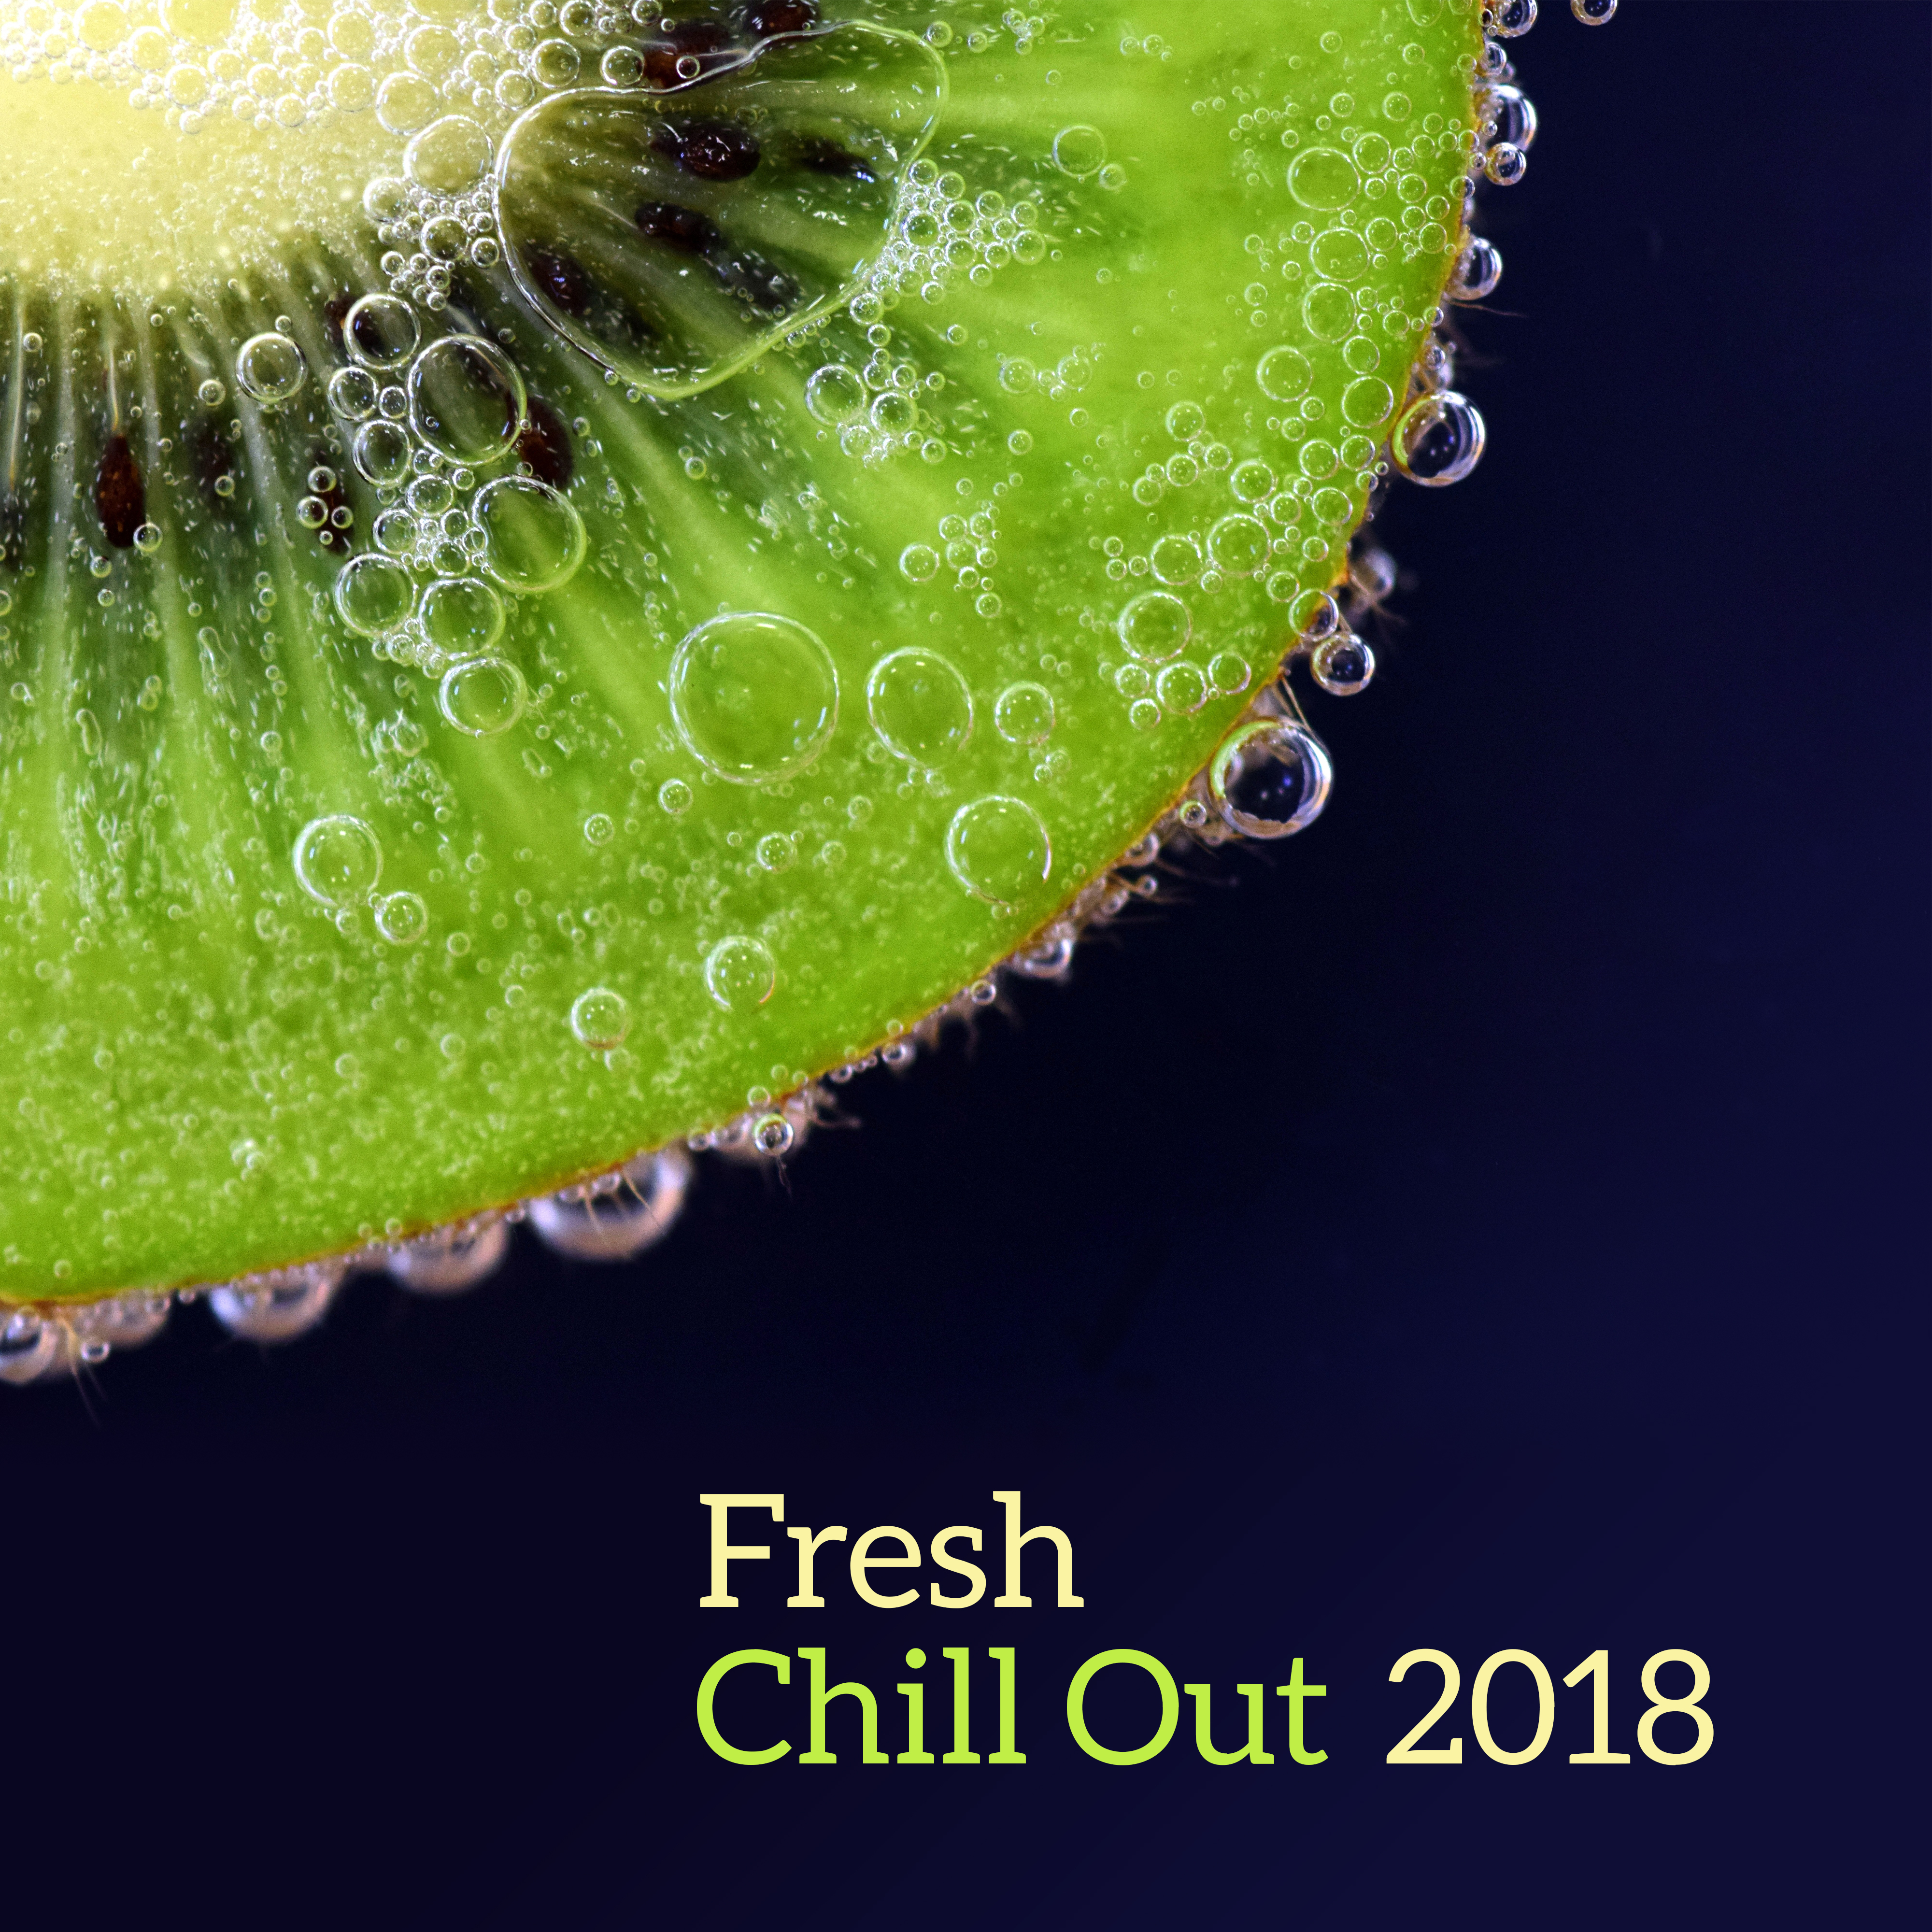 Fresh Chill Out 2018